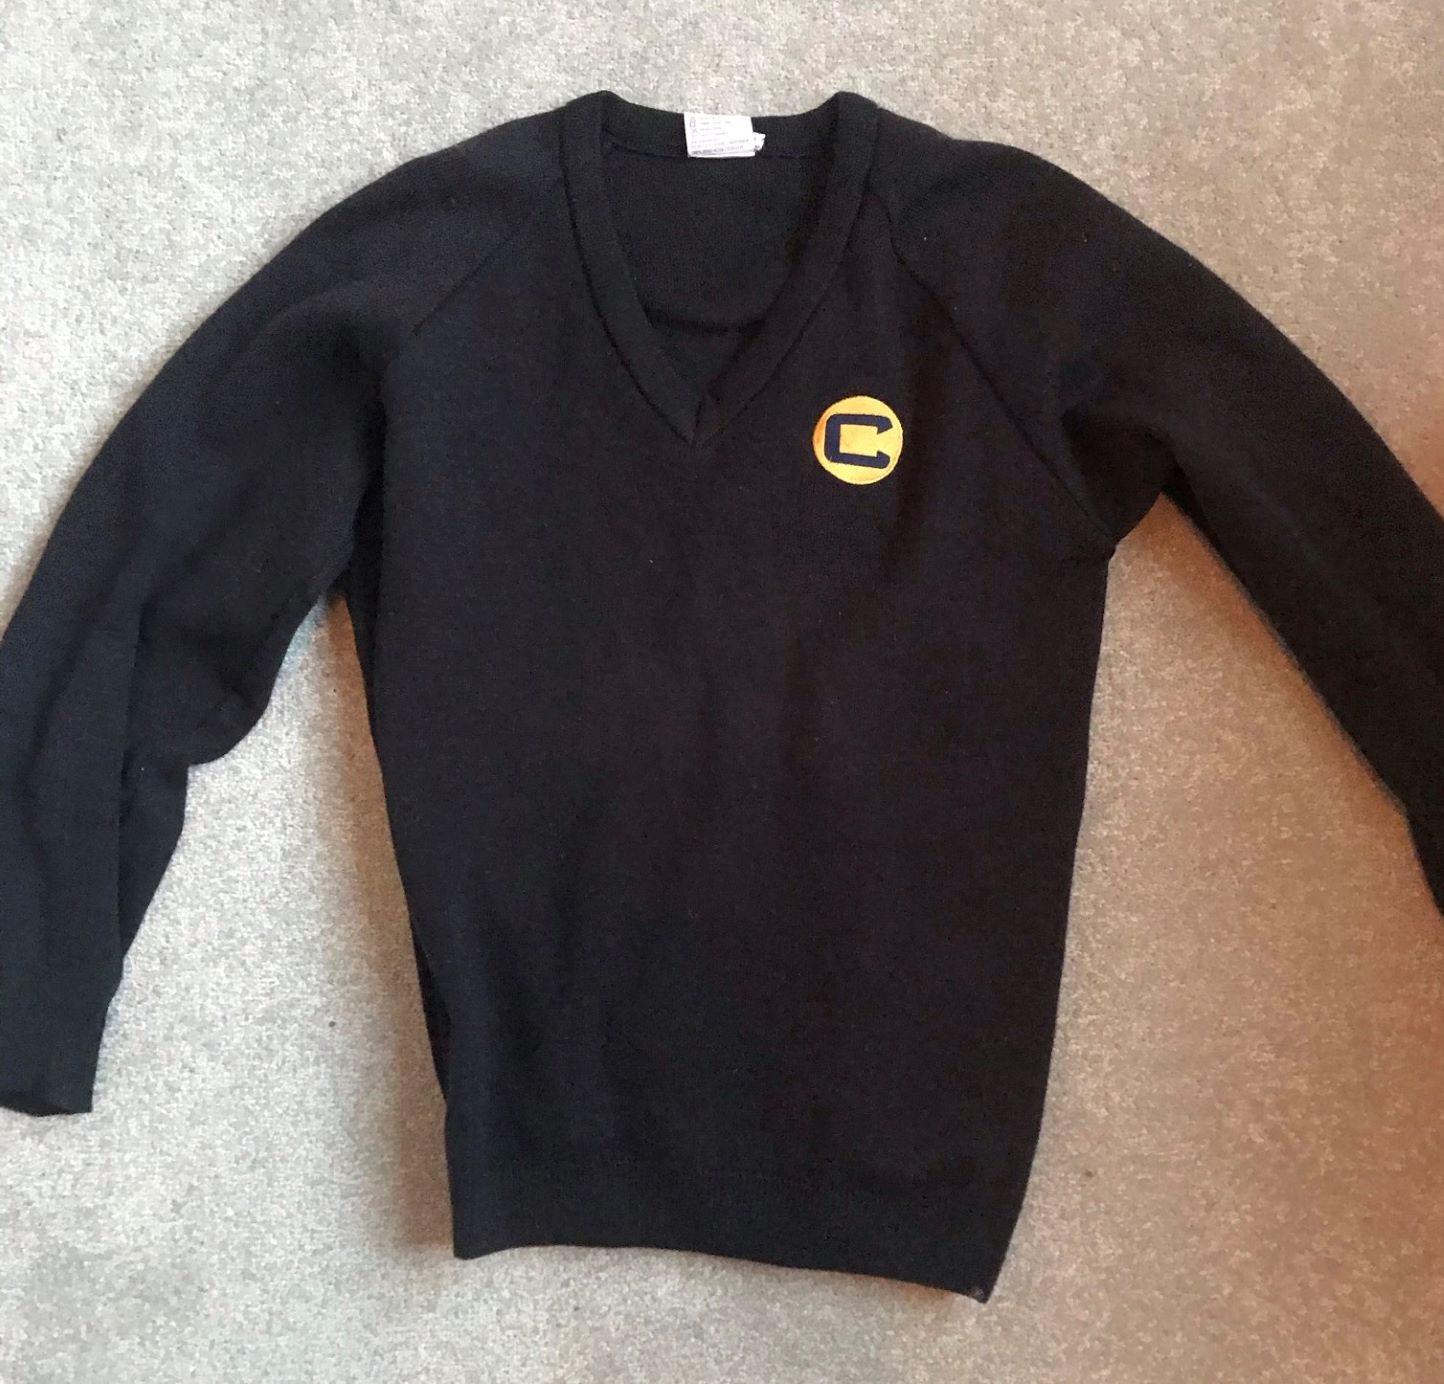 Charter North Jumper: Size 32 Emergency jumper (not great condition but stops you getting detention)